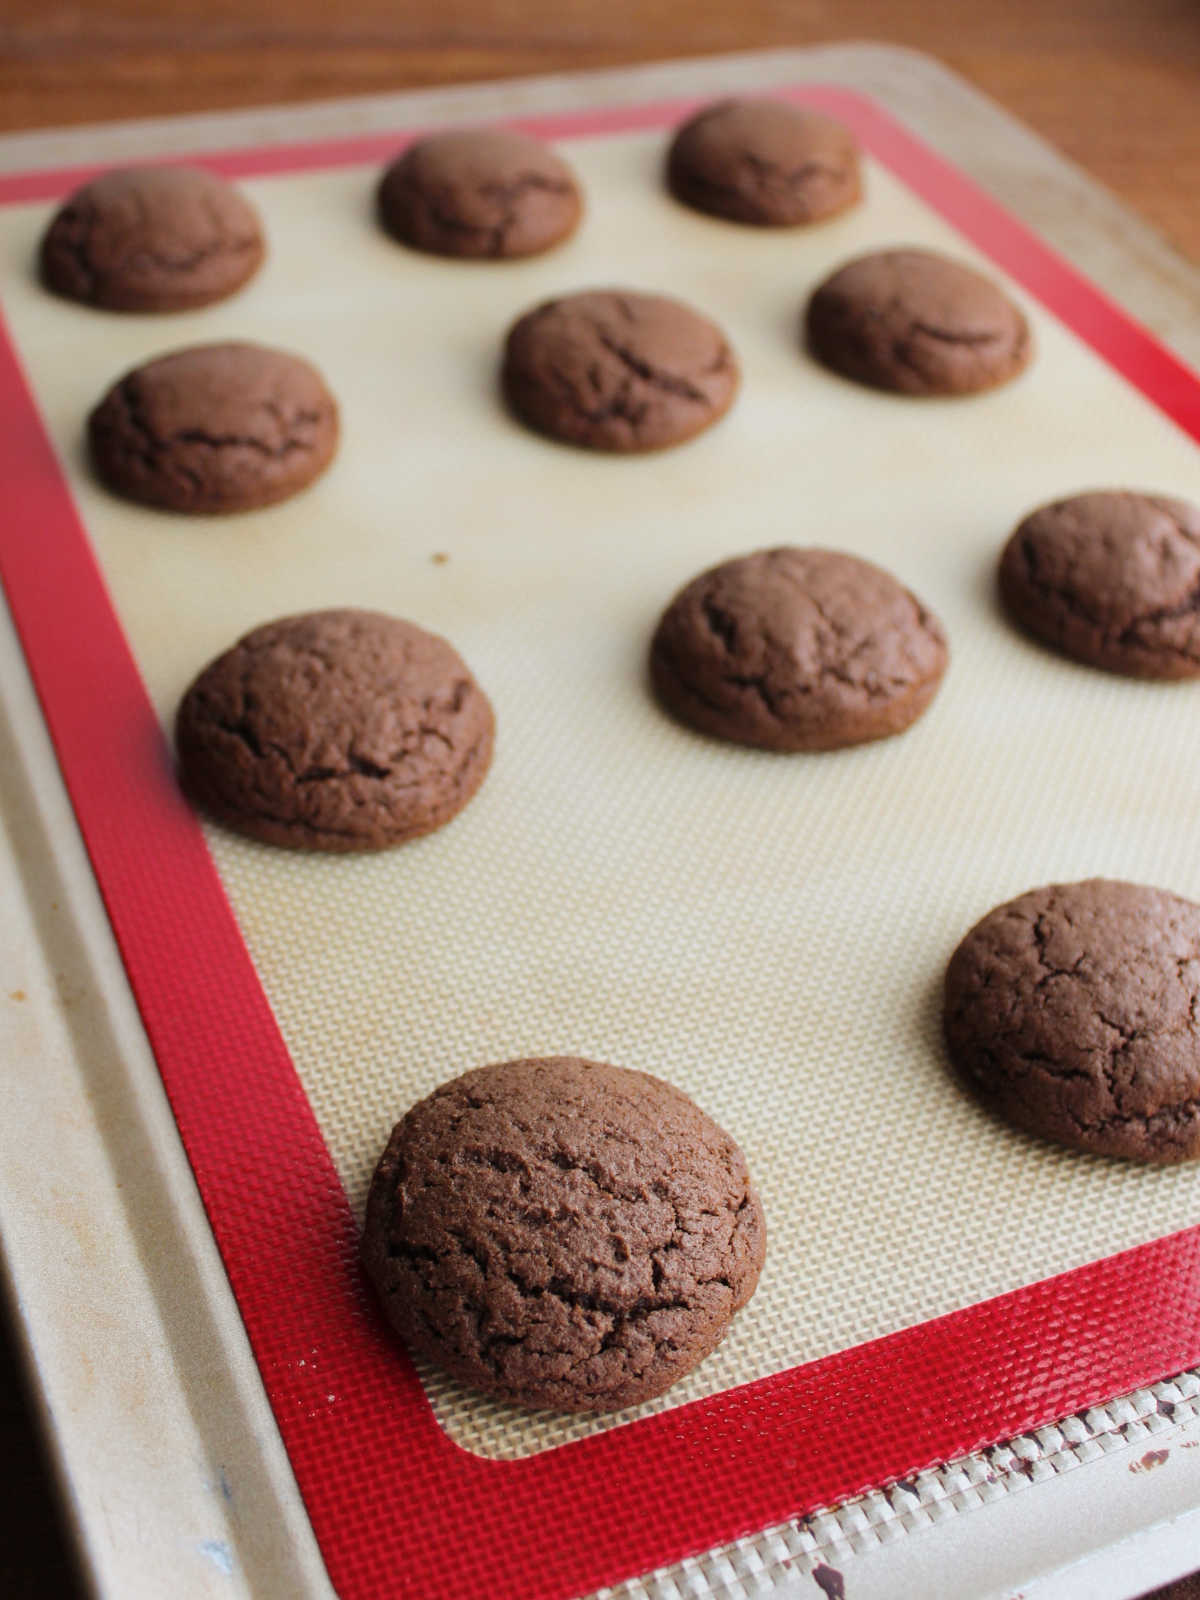 Freshly baked chocolate cookies on pan, showing fluffy texture and round shape.